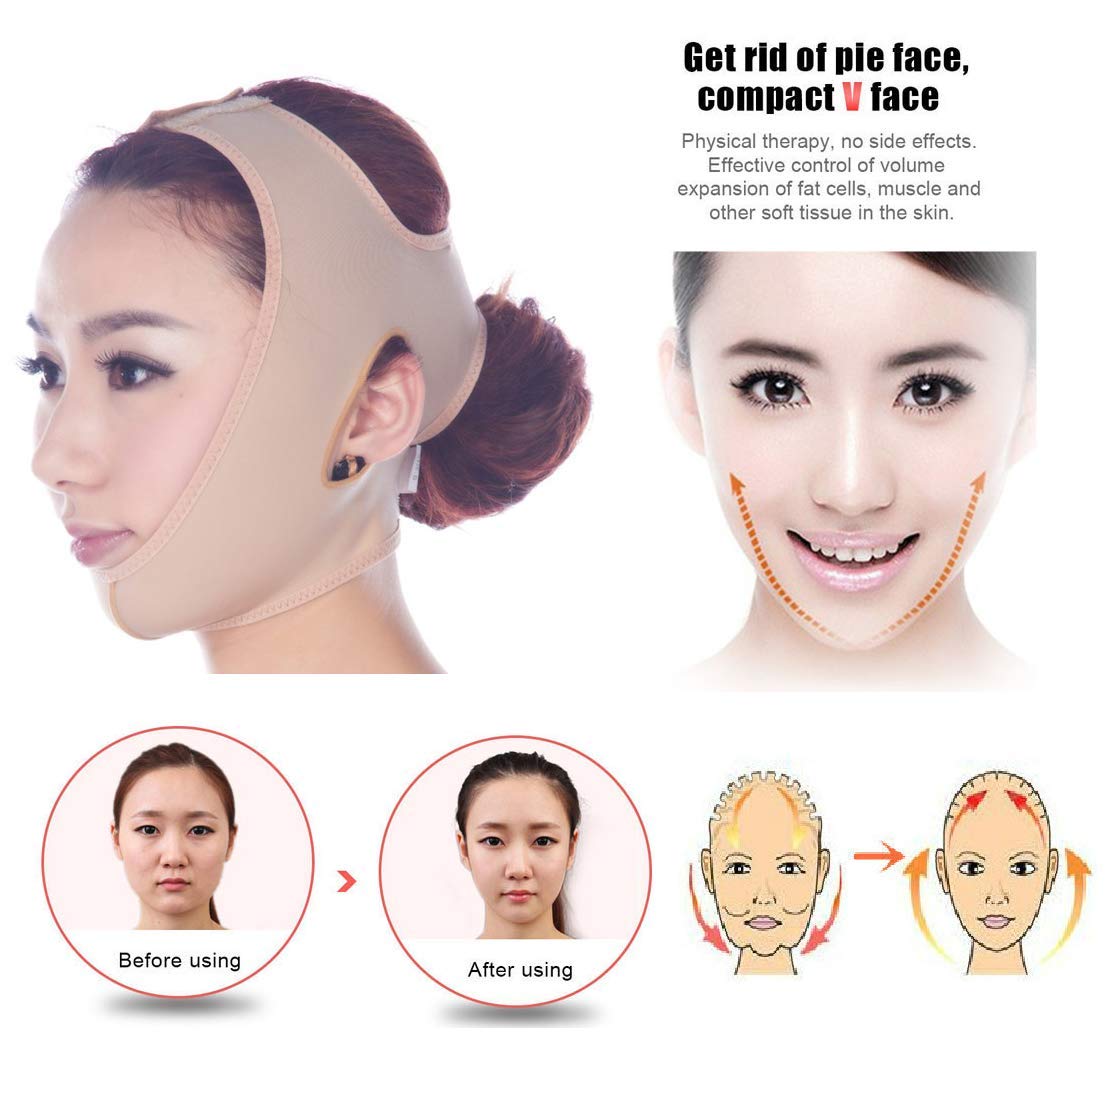 Facial Thin Face Slimming Mask/Belt, Skin Care Chin Bandage, V-Line Lifting Cheek for Anti-Sagging Firming and Wrinkle Beauty Facemask